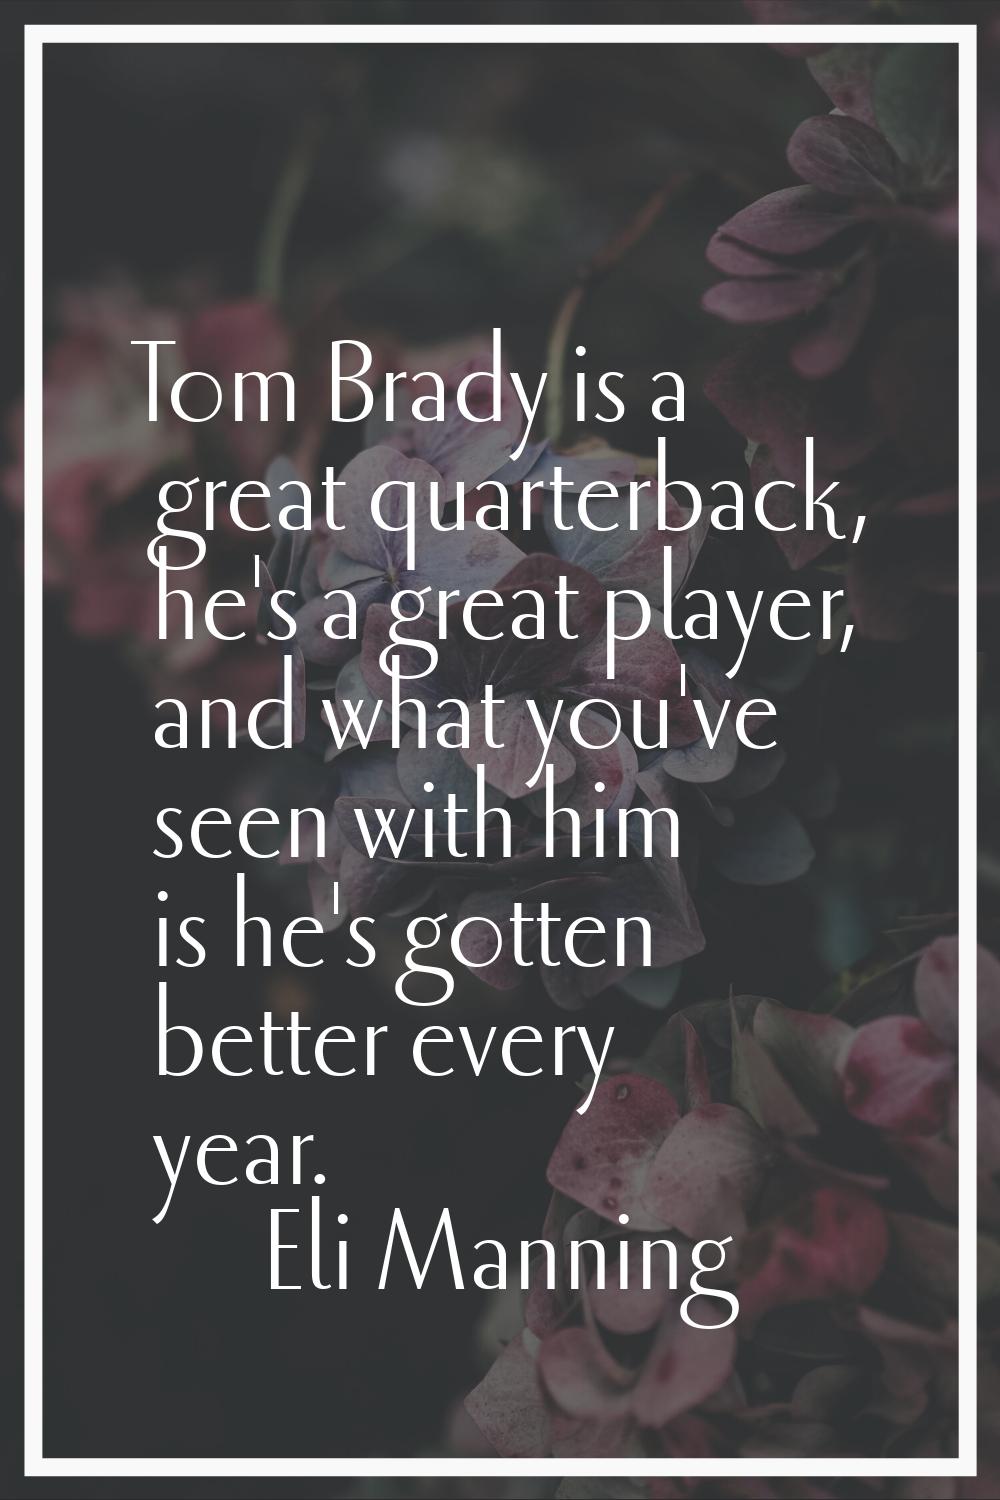 Tom Brady is a great quarterback, he's a great player, and what you've seen with him is he's gotten